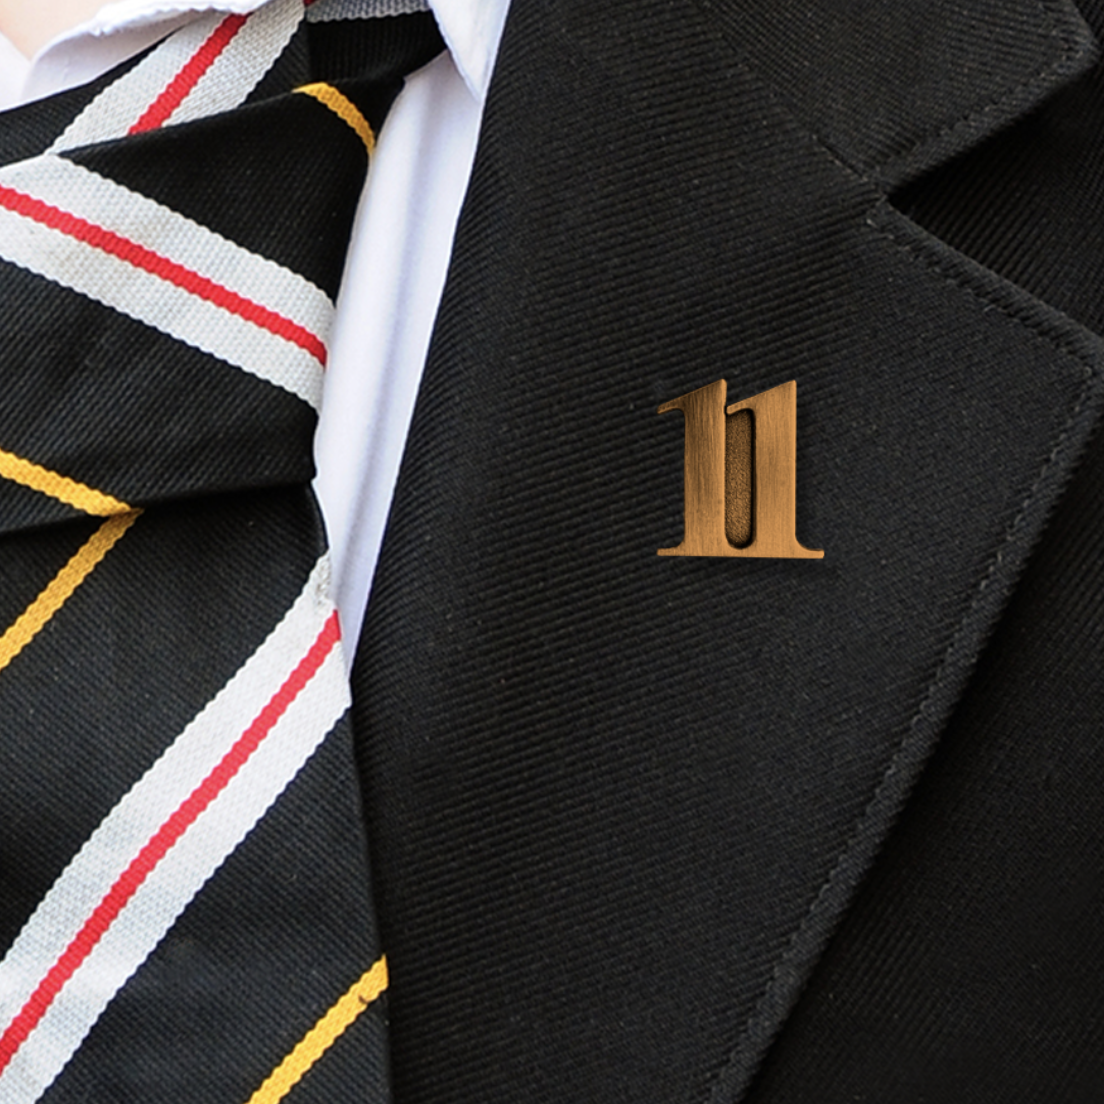 NUMBER 11 YEAR BADGES IN BRONZE